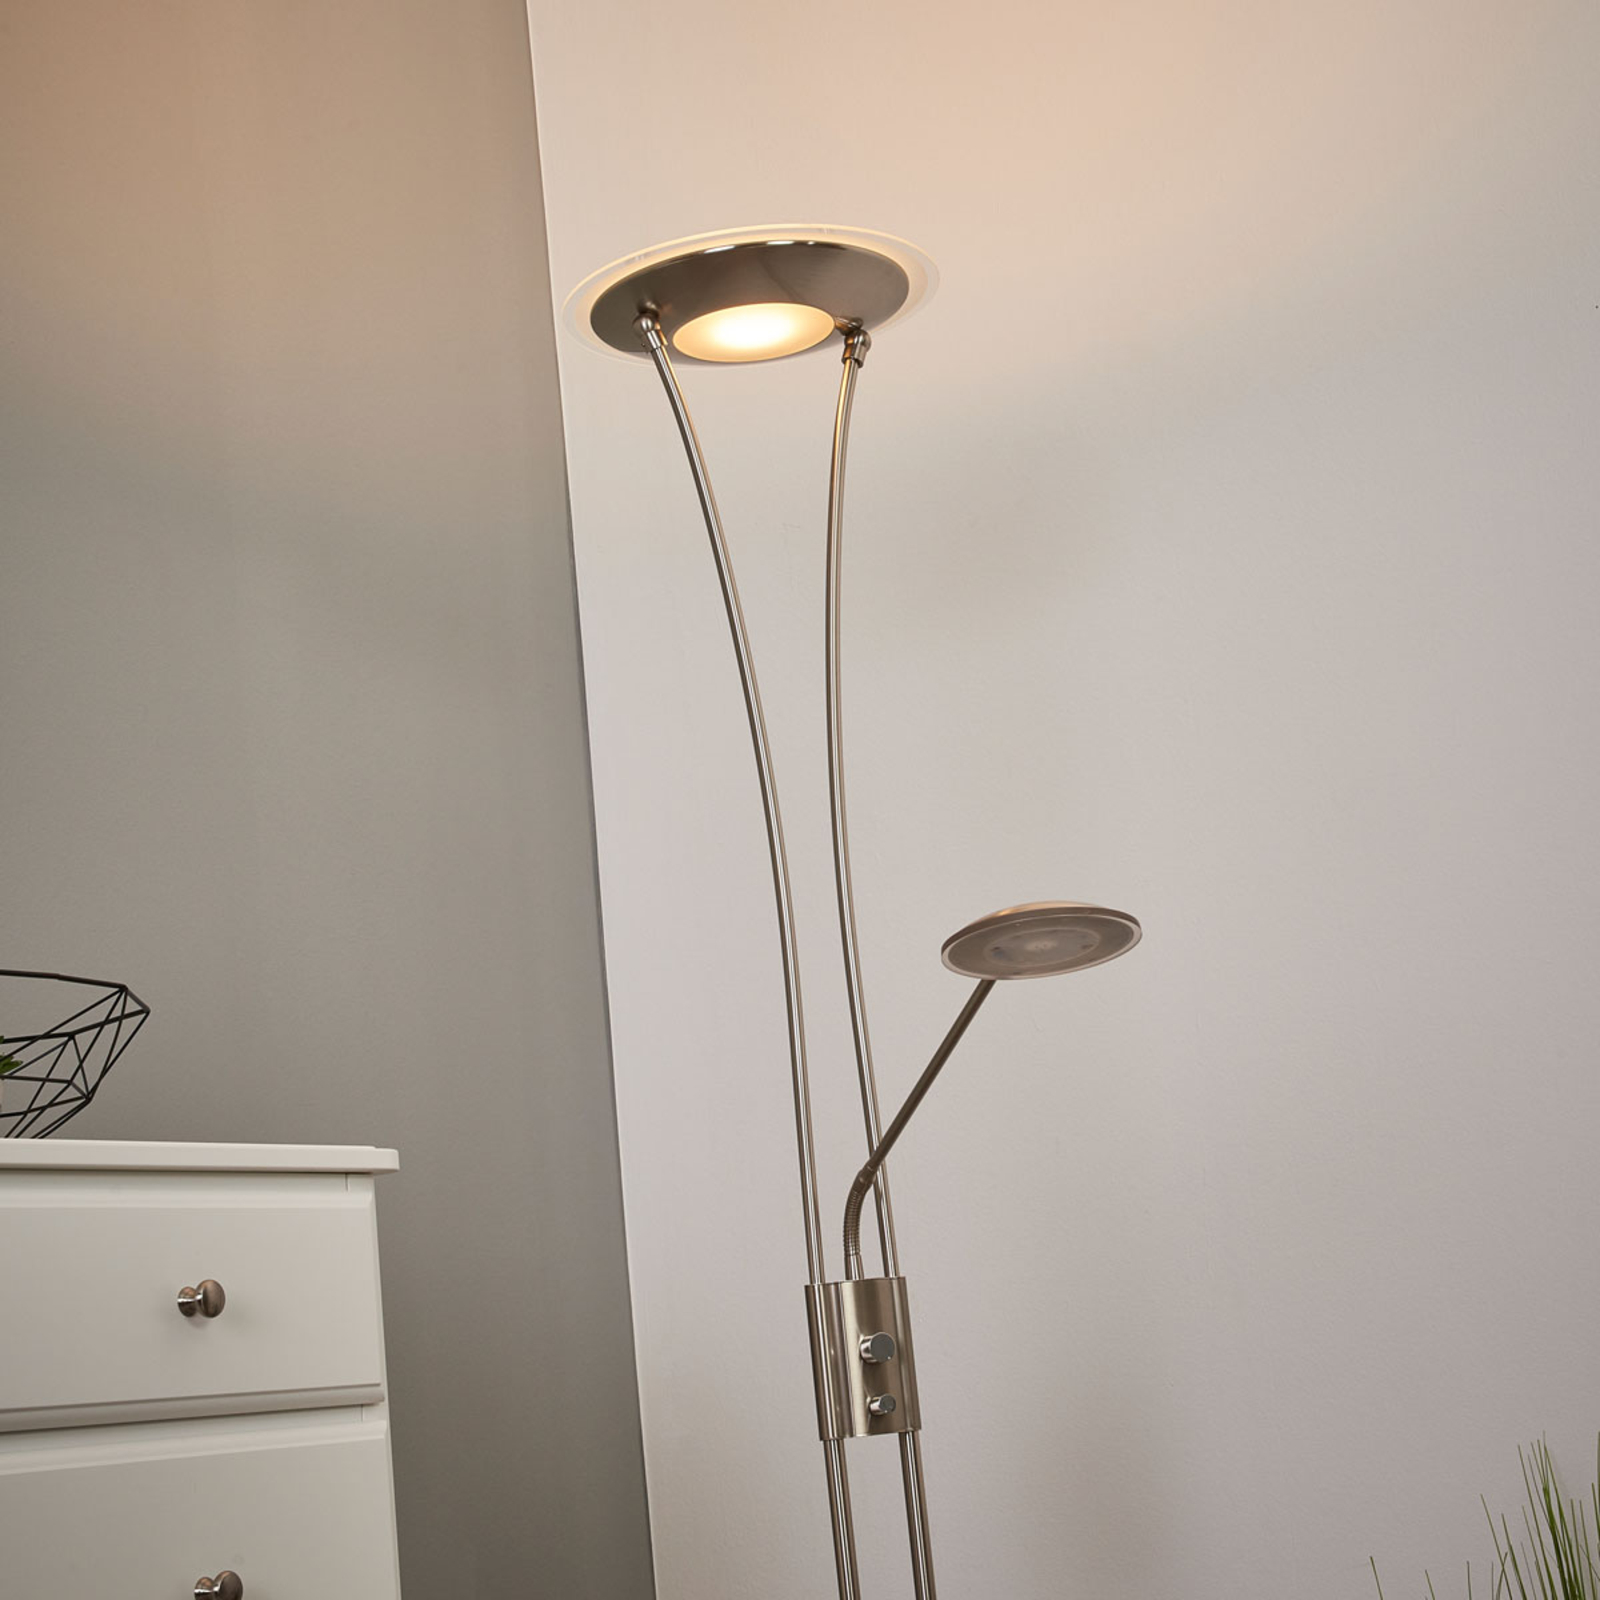 Eda LED uplighter with a dimmer, nickel